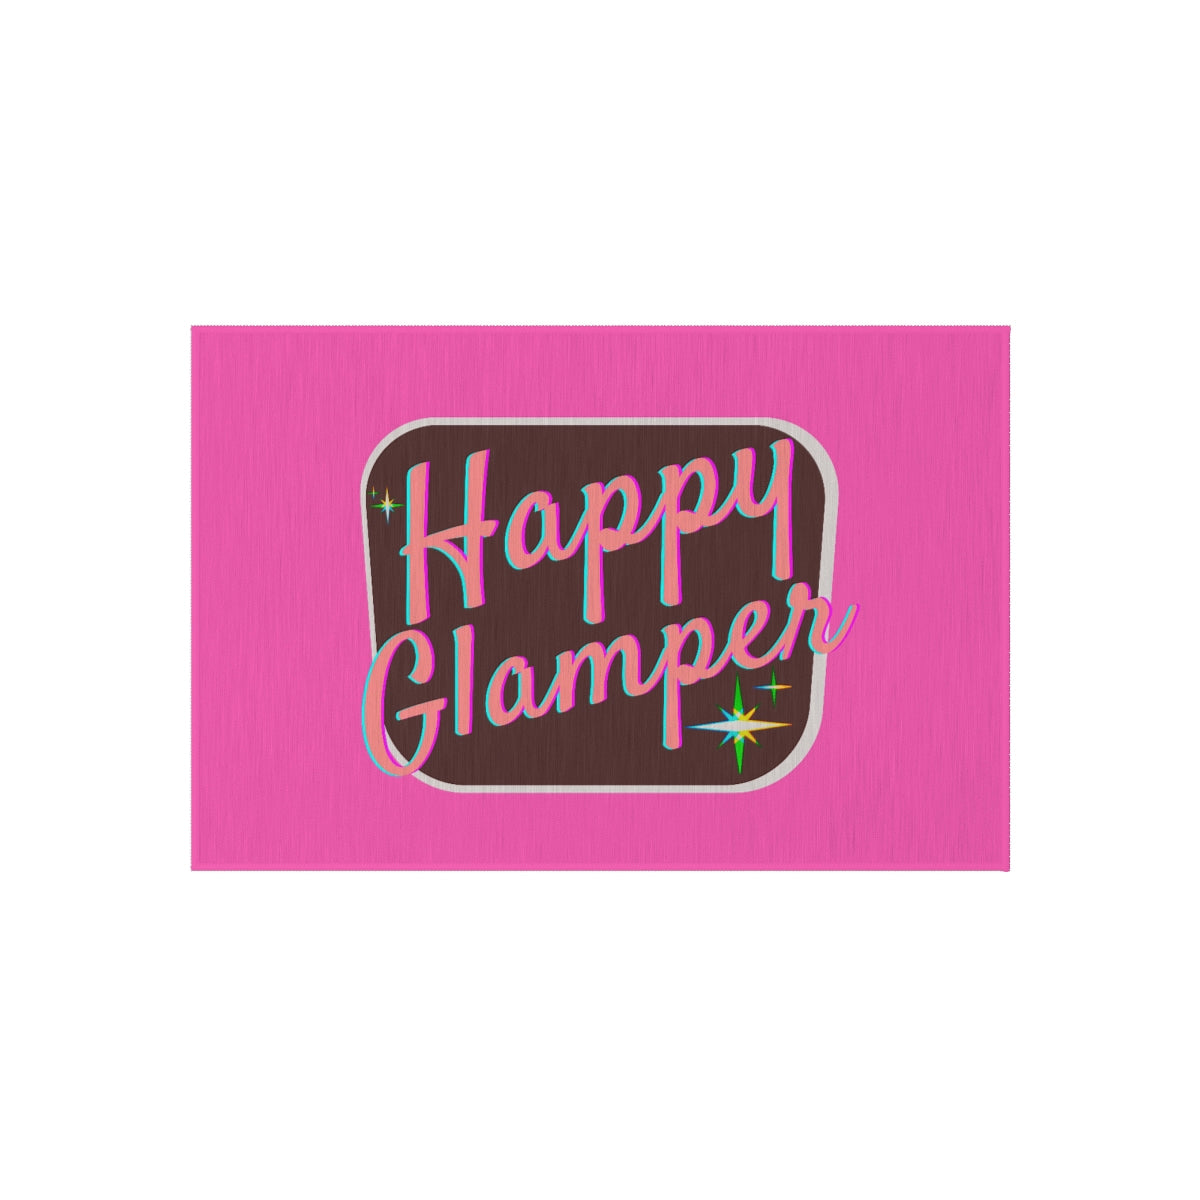 Vintage-Inspired Happy Glamping Rug for Your Camper Van, Tent, or RV